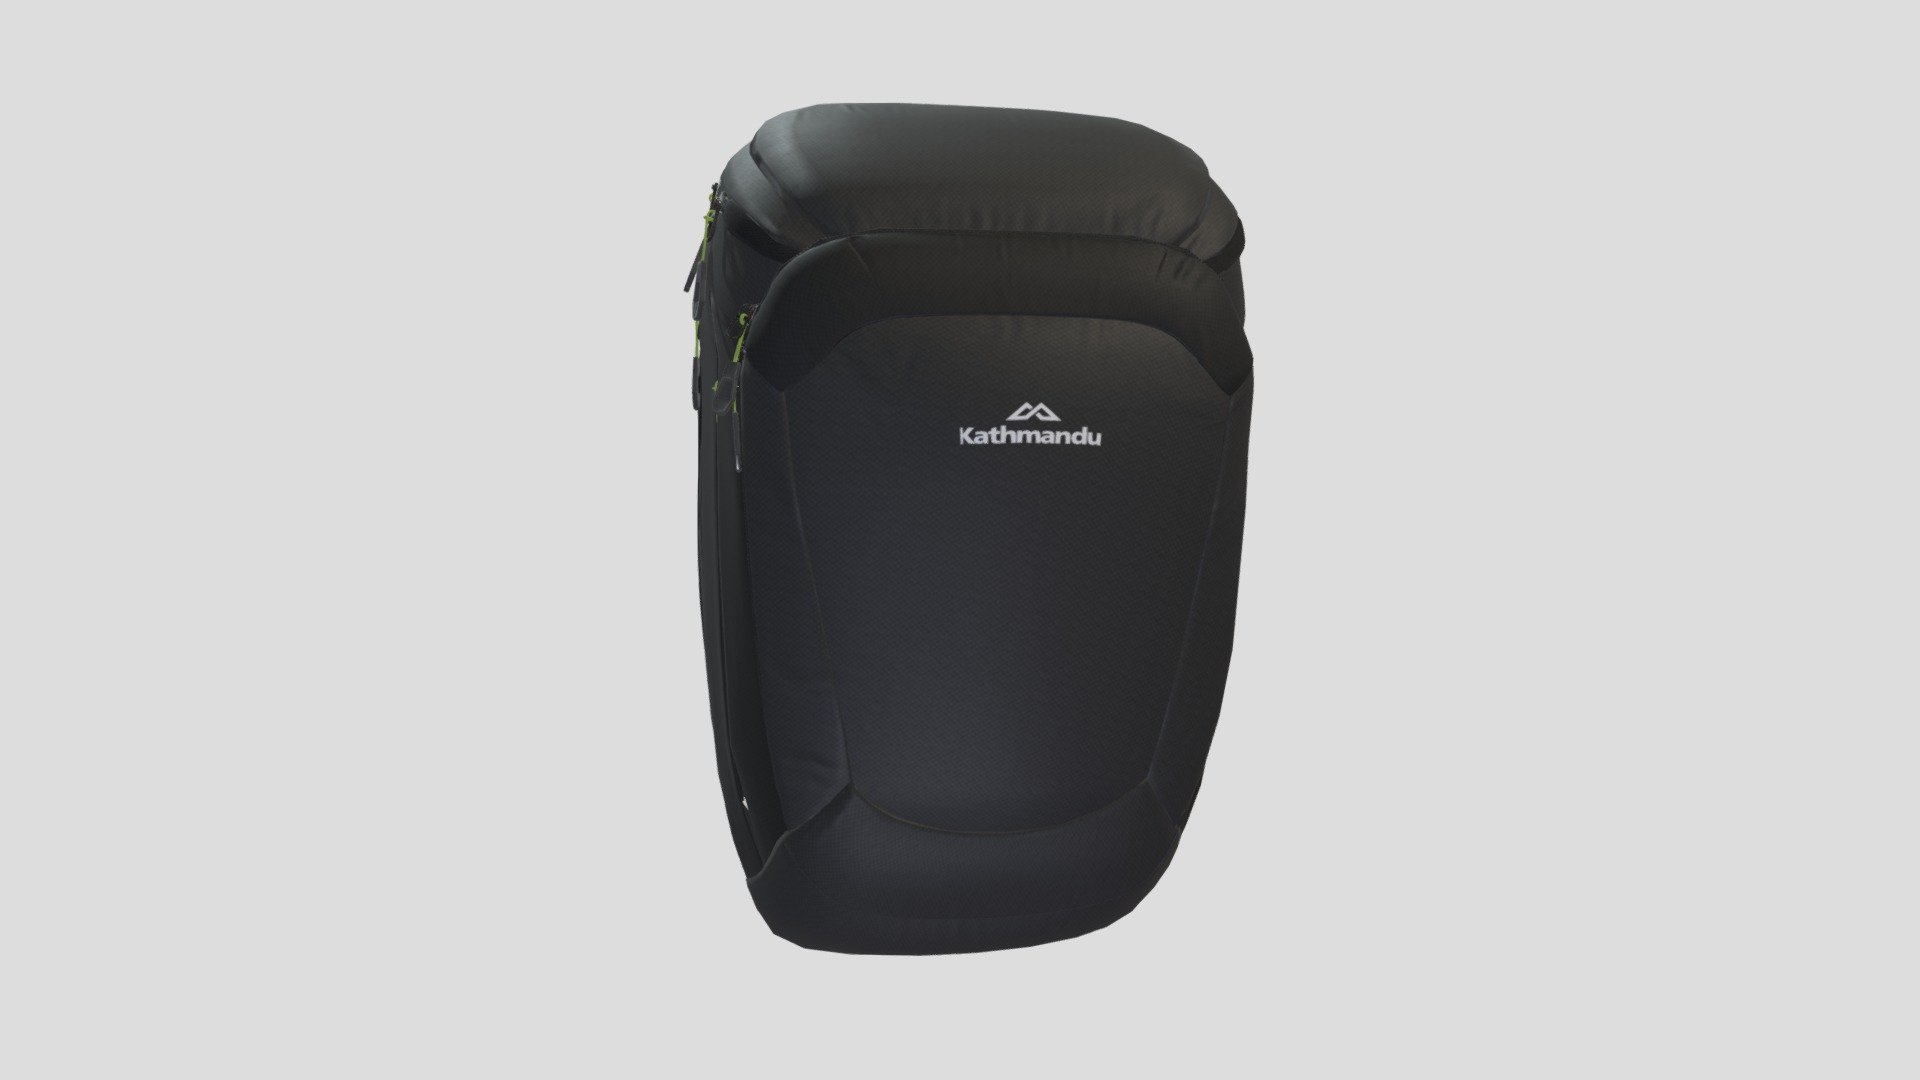 Check out this high quality low-poly 3D model of Kathmandu Backpack.

For your 3D modelling requirements connect with us at info@shinobu3d.com.

We offer premium quality low poly 3D assets/models for AR/VR applications, 3D visualisations, 3D product configurators, 3D printing &amp; 3D animations.

Visit https://www.shinobu3d.com for more on us 3d model